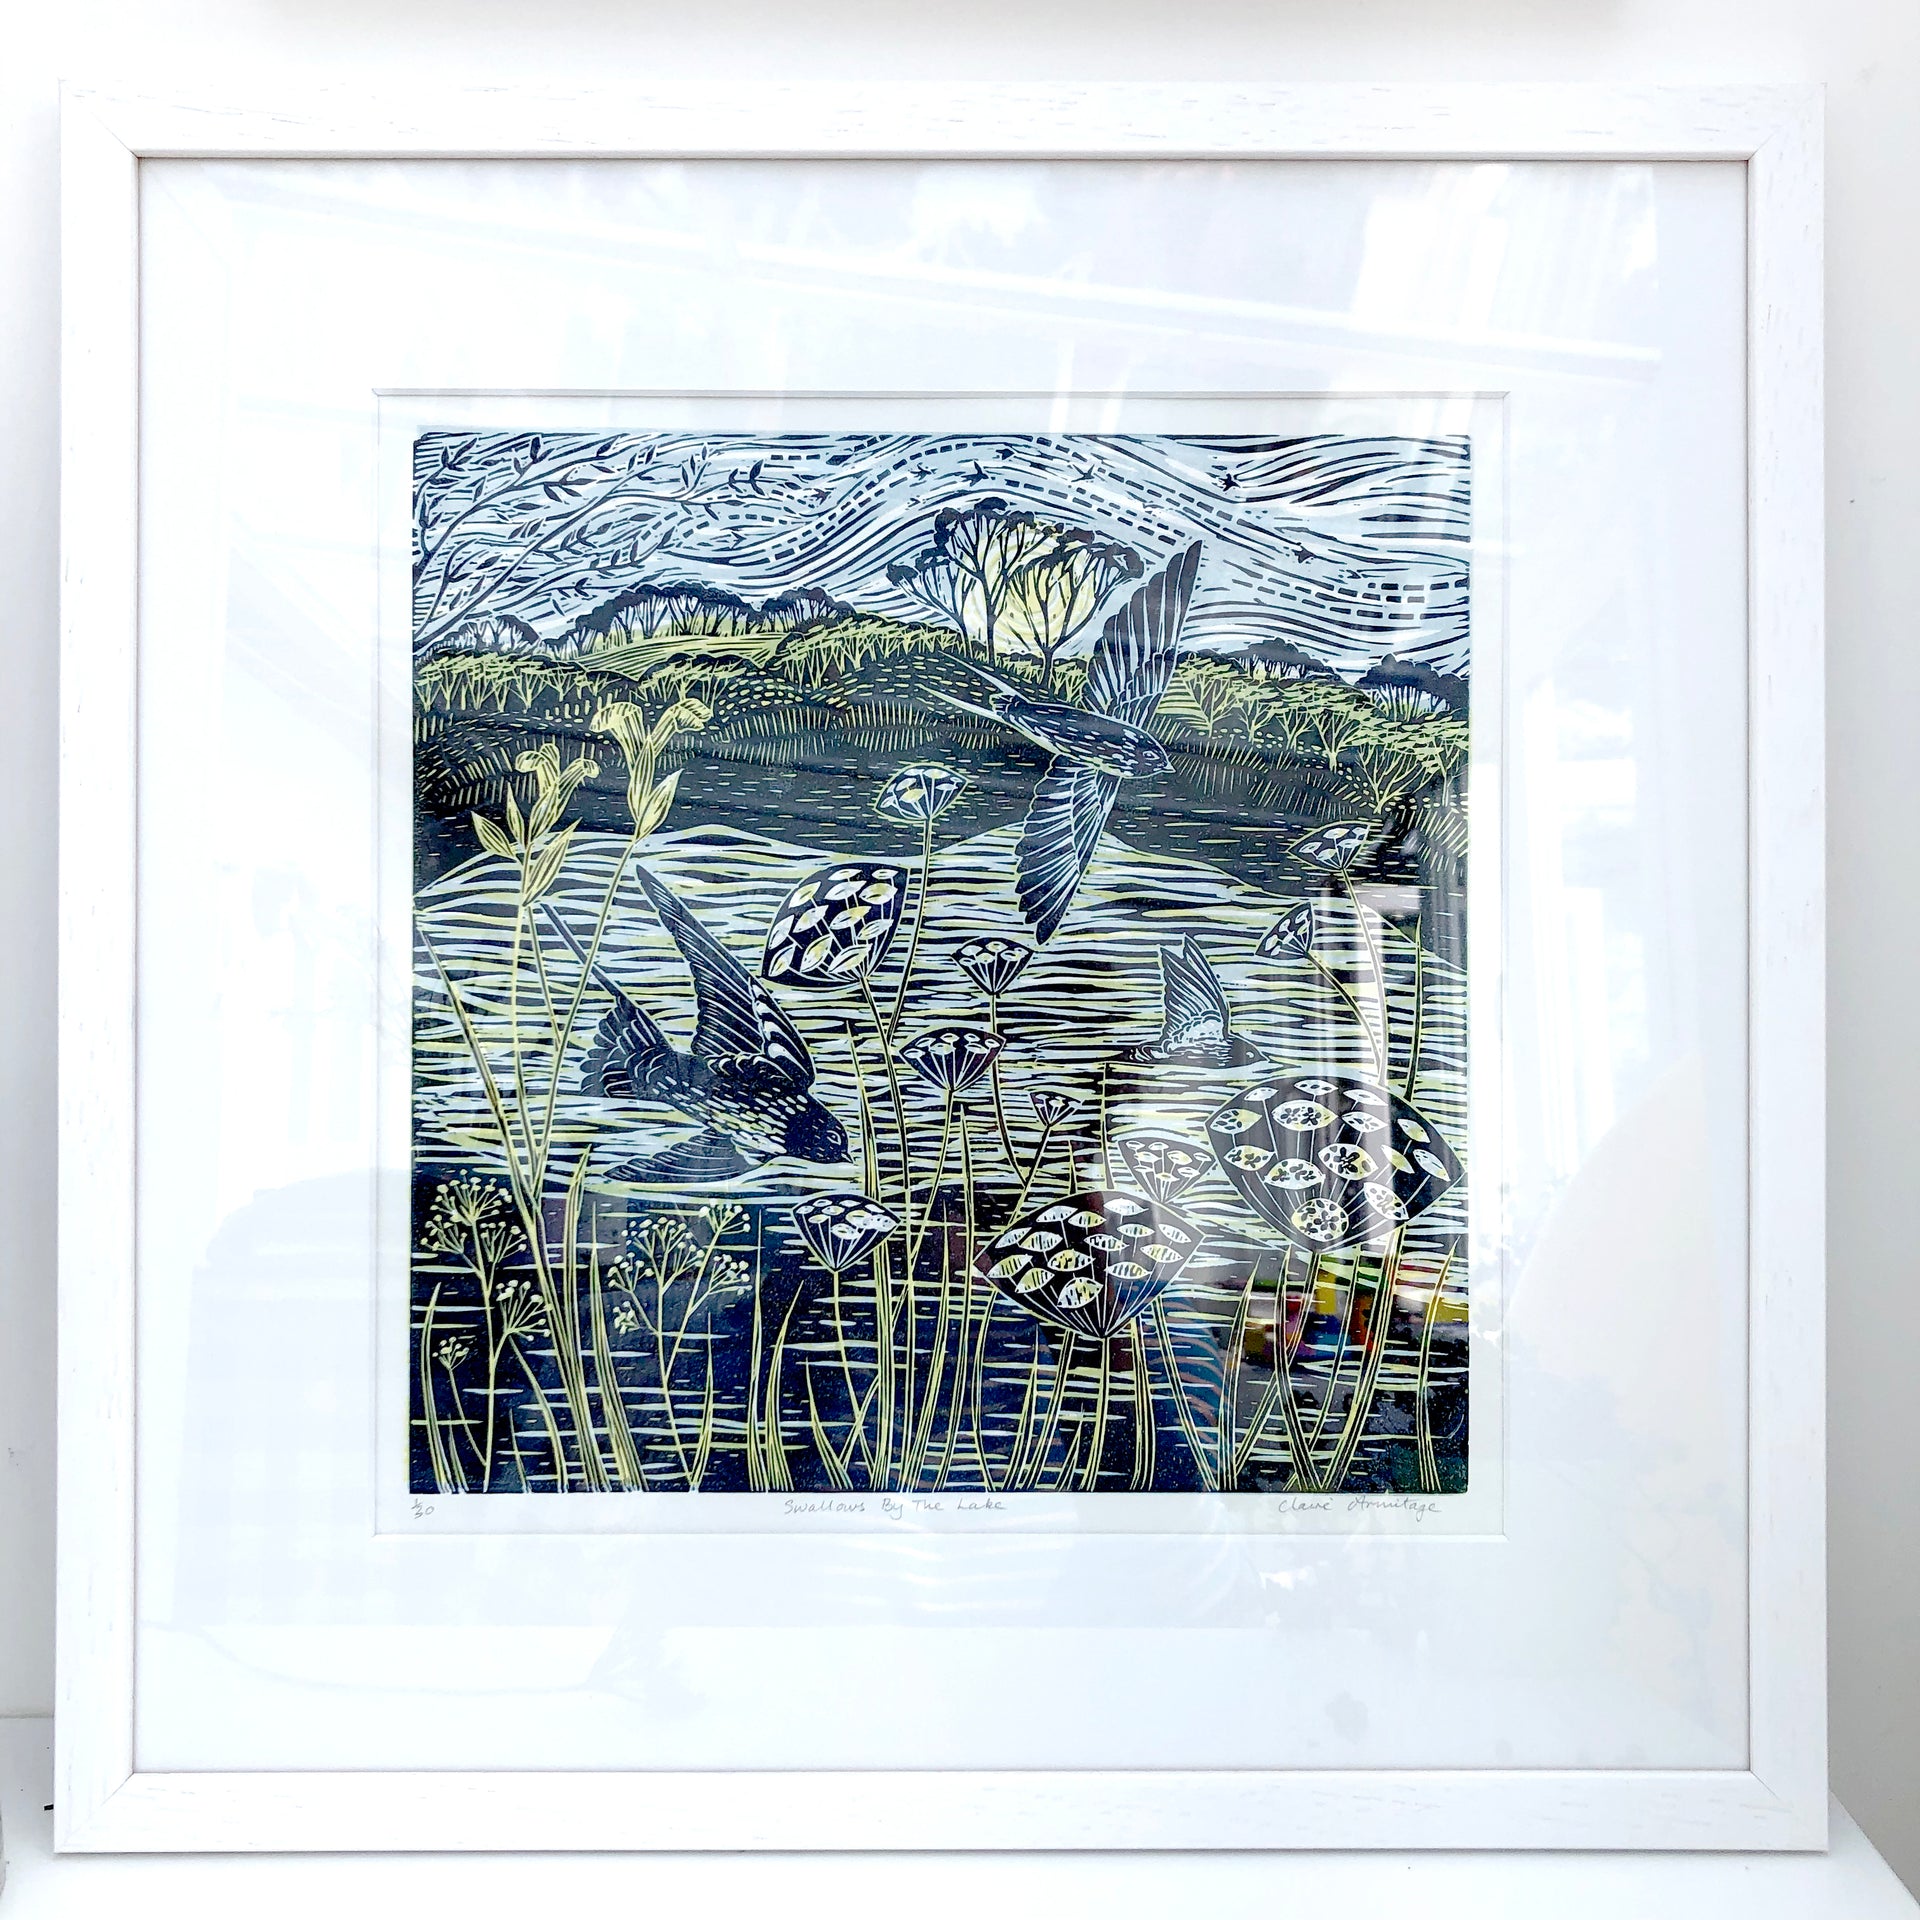 Lino print by artist Claire Armitage of swallows over lake in blue and yellow tones